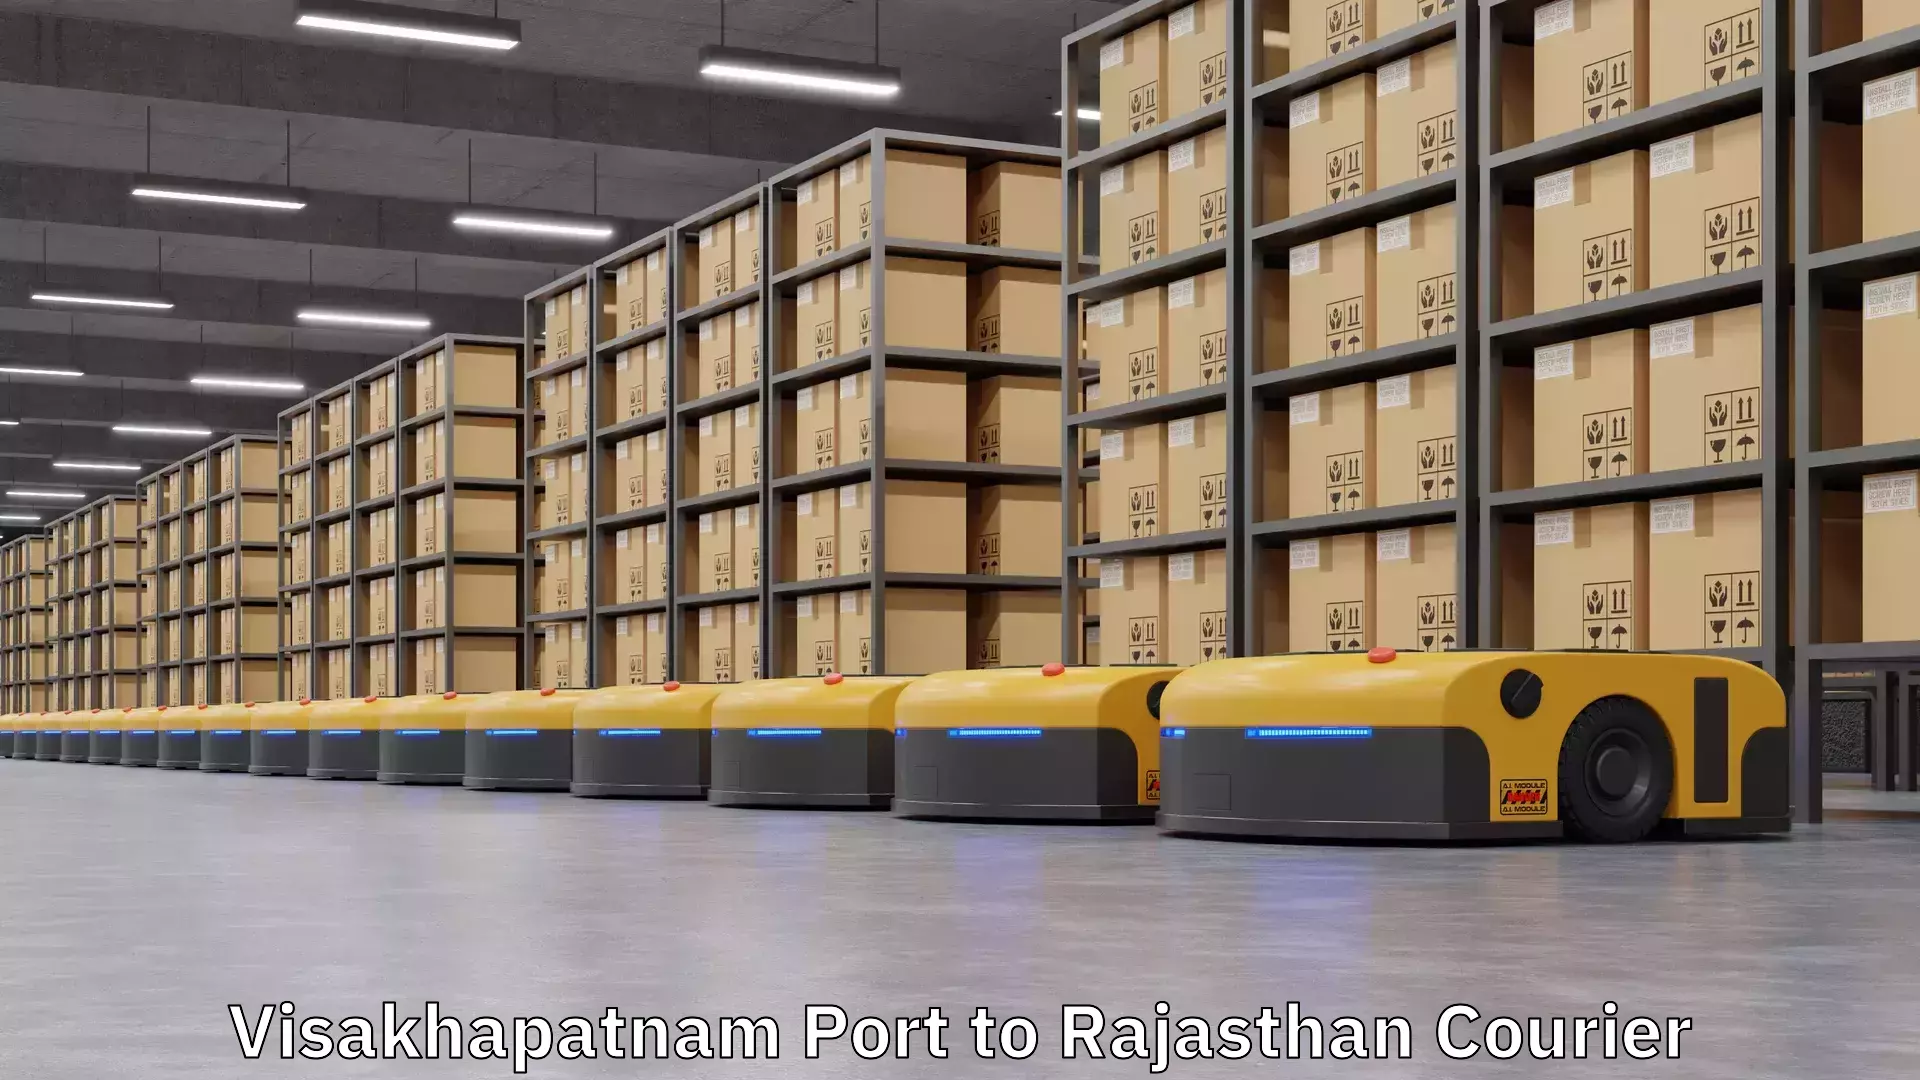 Next day courier Visakhapatnam Port to Rajasthan